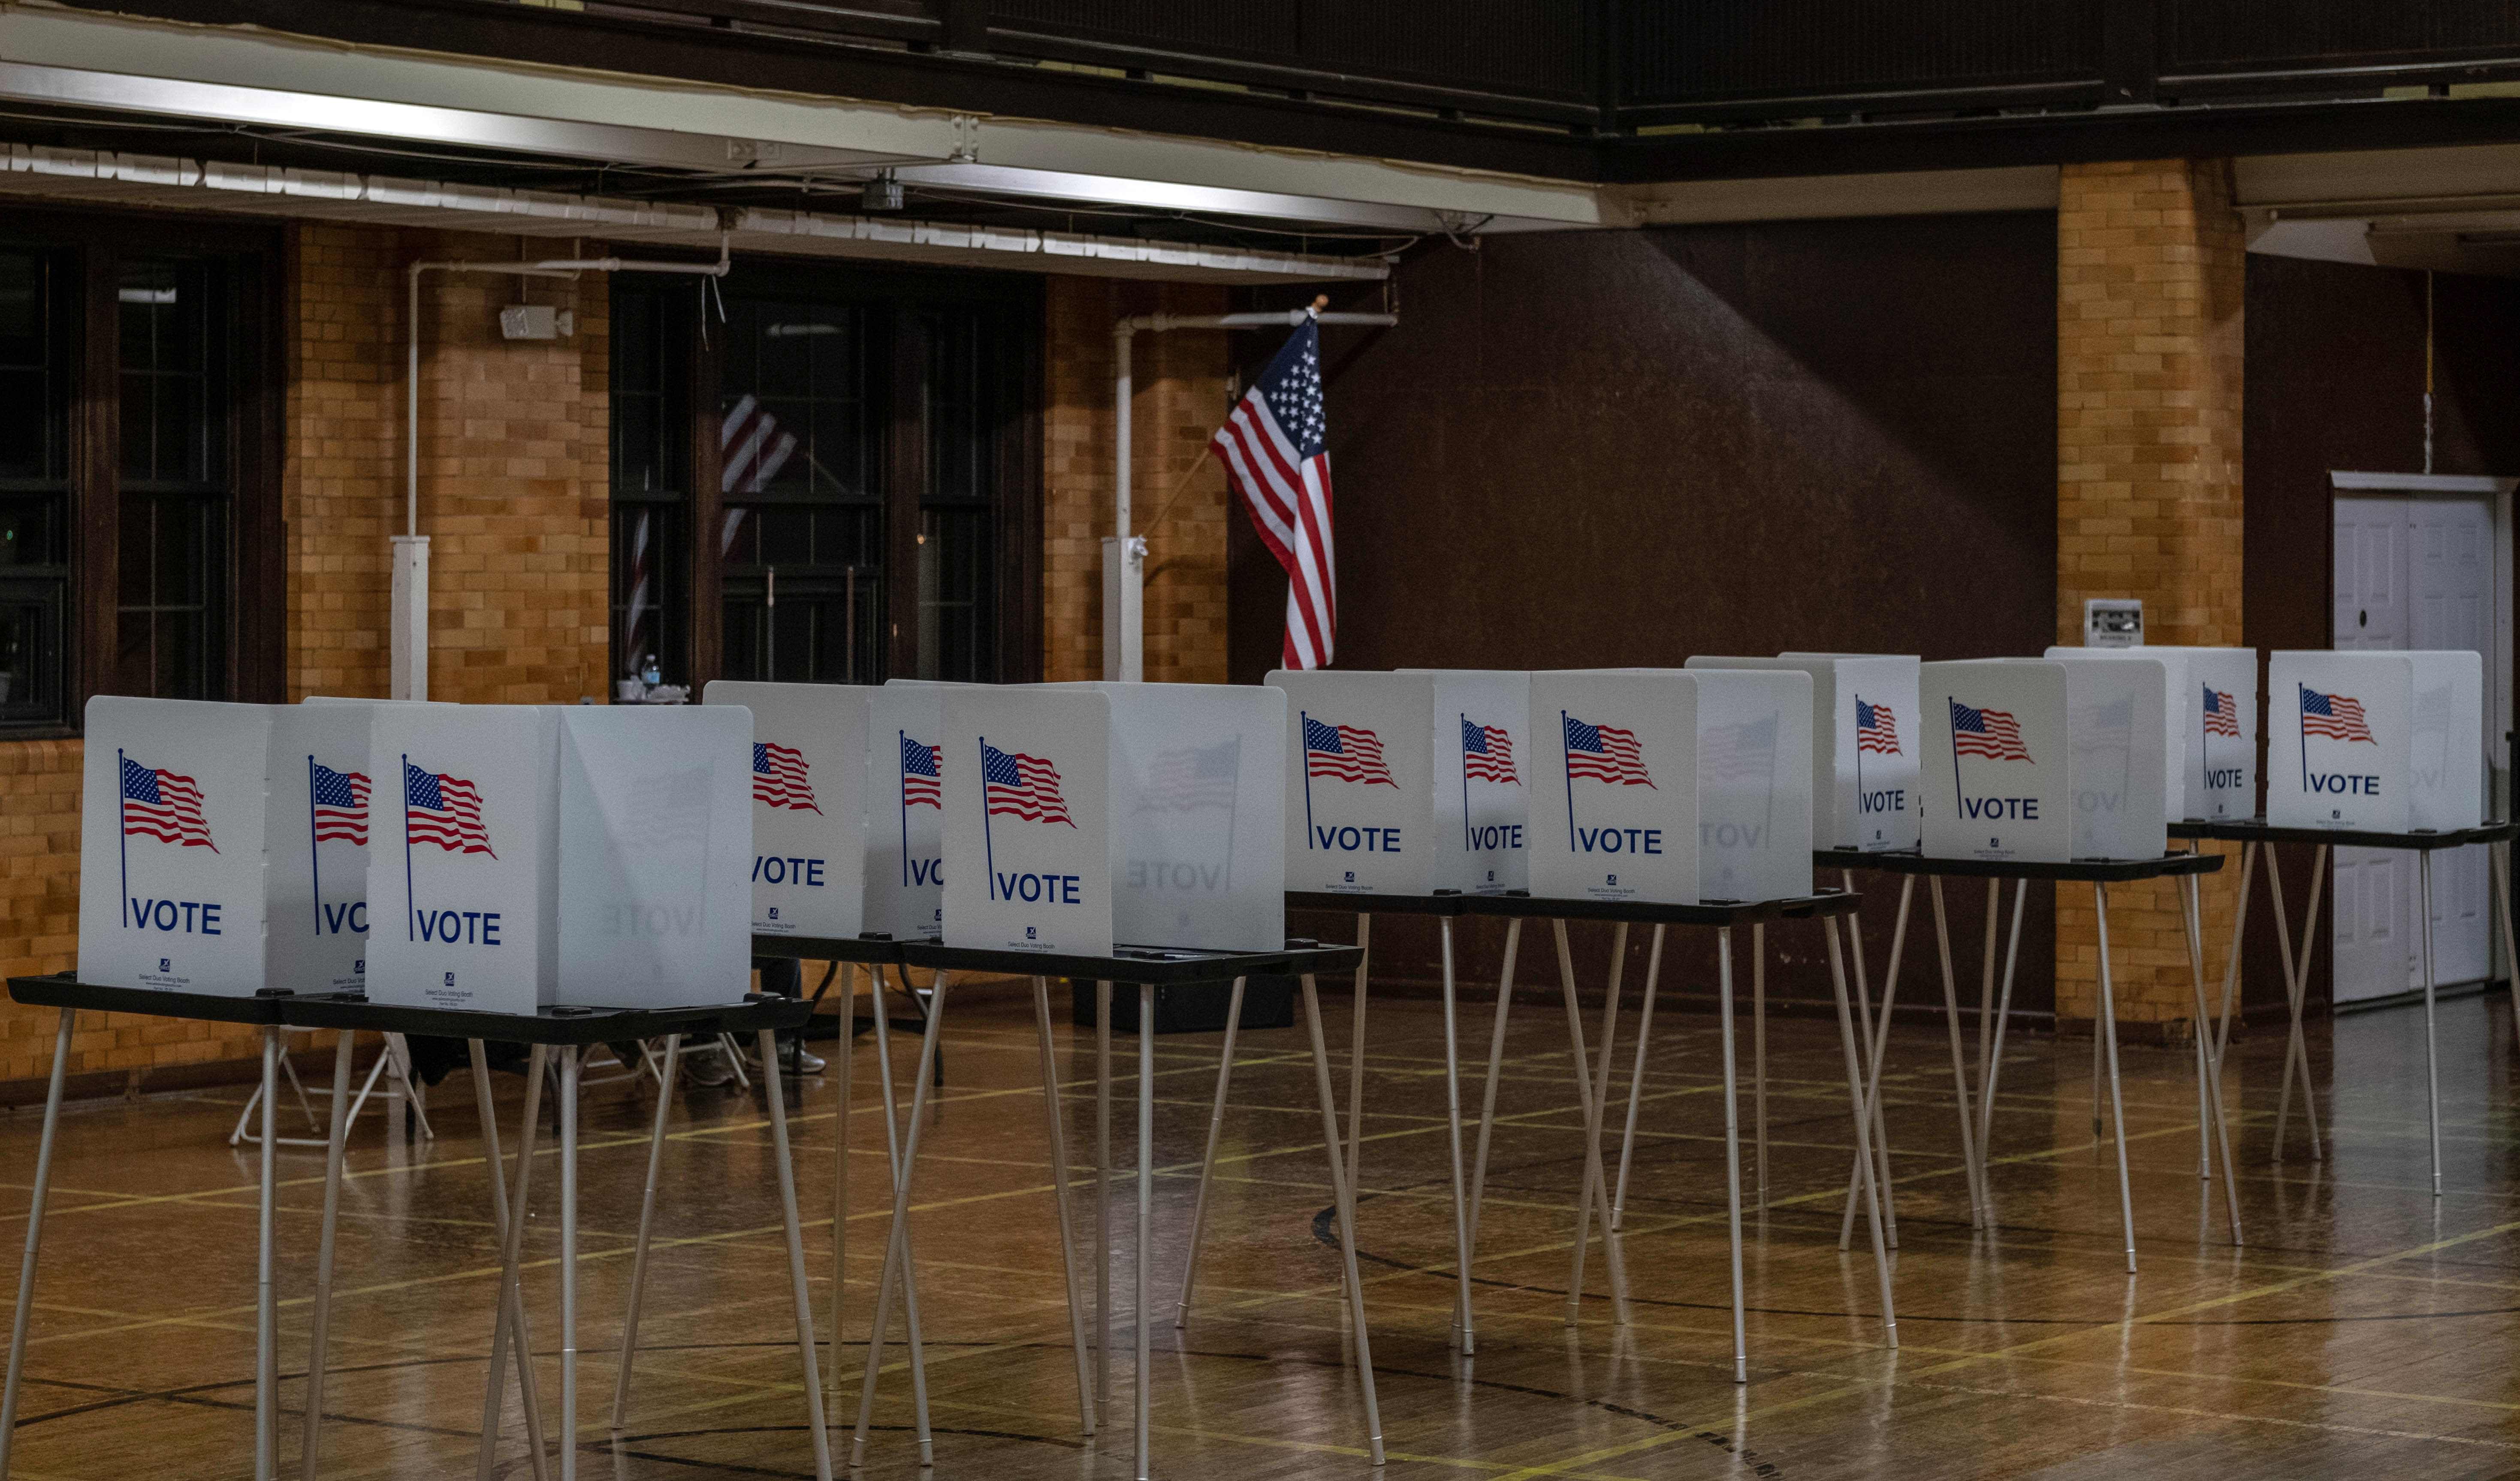 Empty voting booths are seen in Flint, Michigan at the Berston Fieldhouse polling place on November 3, 2020. - The US is voting Tuesday in an election amounting to a referendum on Donald Trump's uniquely brash and bruising presidency, which Democratic opponent and frontrunner Joe Biden urged Americans to end to restore "our democracy." Credit: AFP